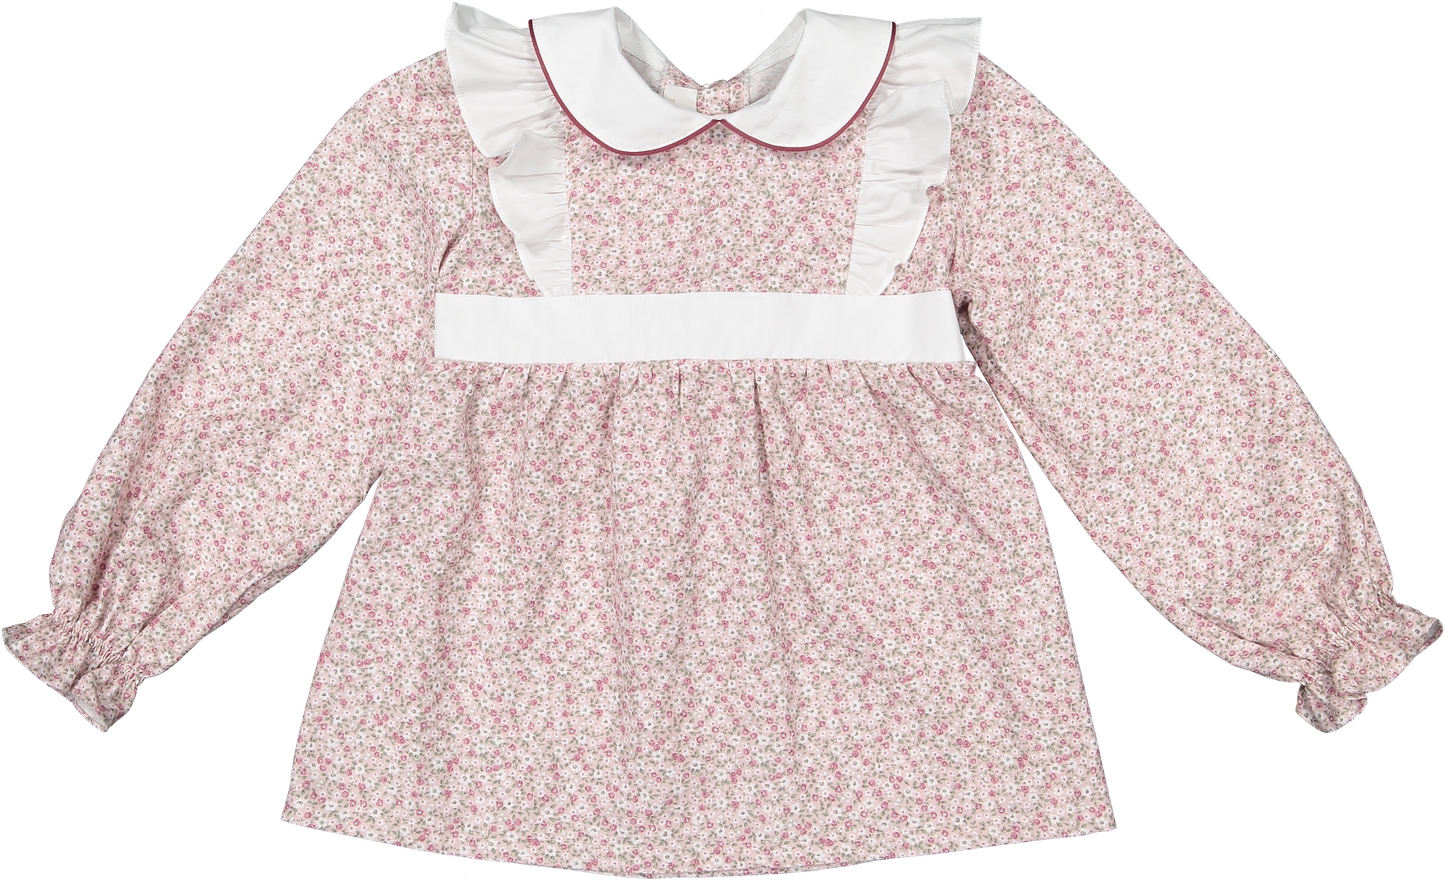 Raspberry girls top with a mauve floral print and maroon piping around the peter pan collar with a white bow on the back of the blouse by Sal & Pimenta. 